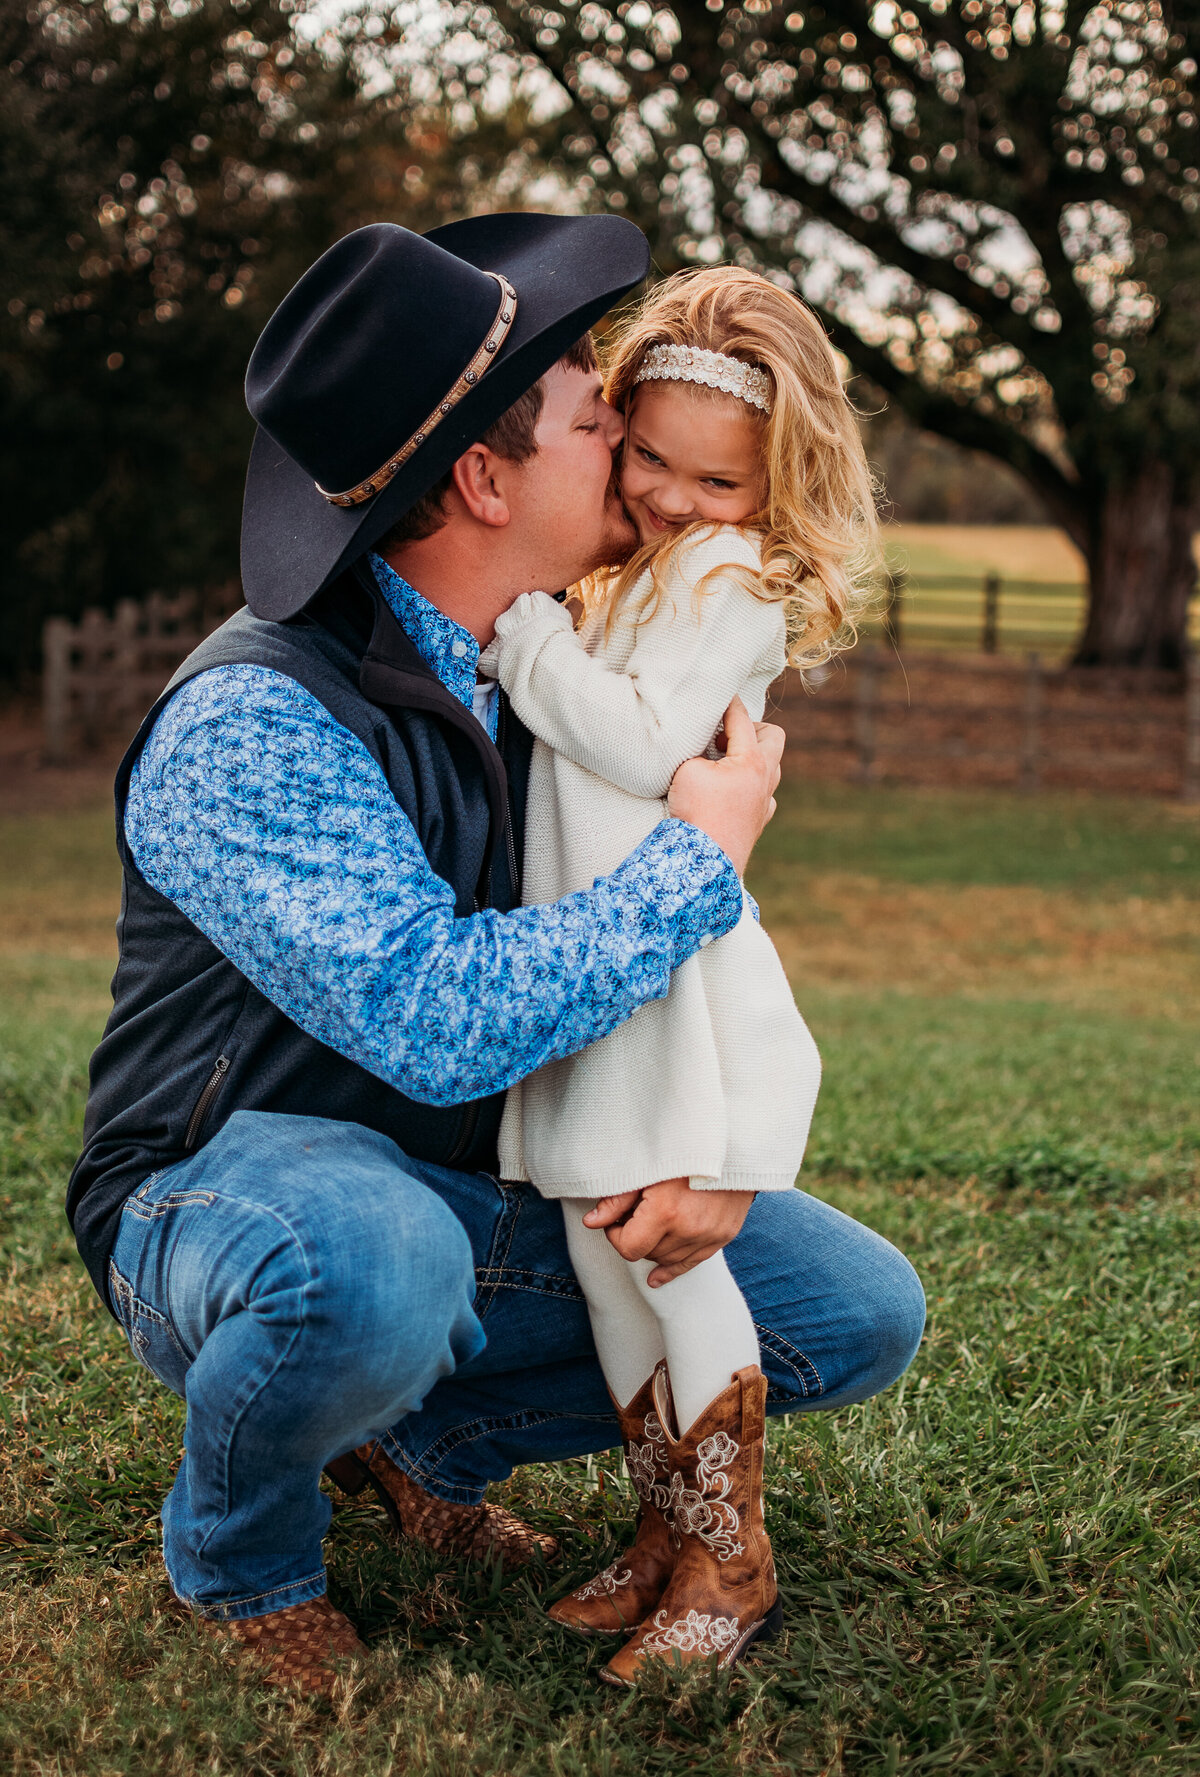 A dad wearing a cowboy hat hugs and tickles his daughter.